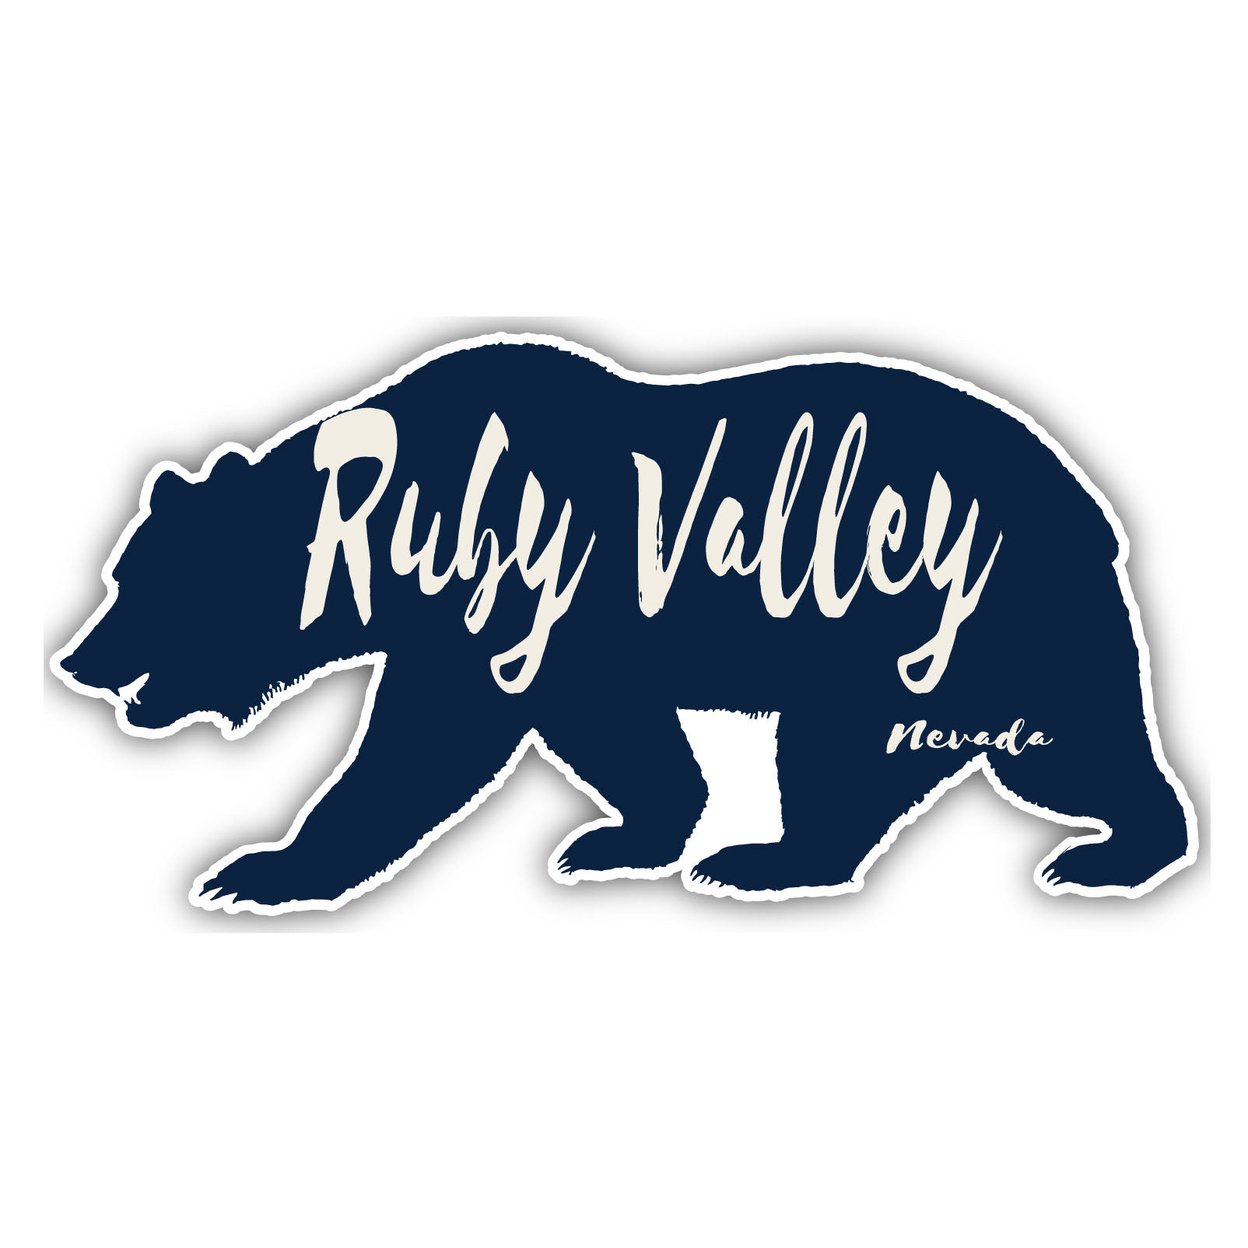 Ruby Valley Nevada Souvenir Decorative Stickers (Choose Theme And Size) - Single Unit, 2-Inch, Bear